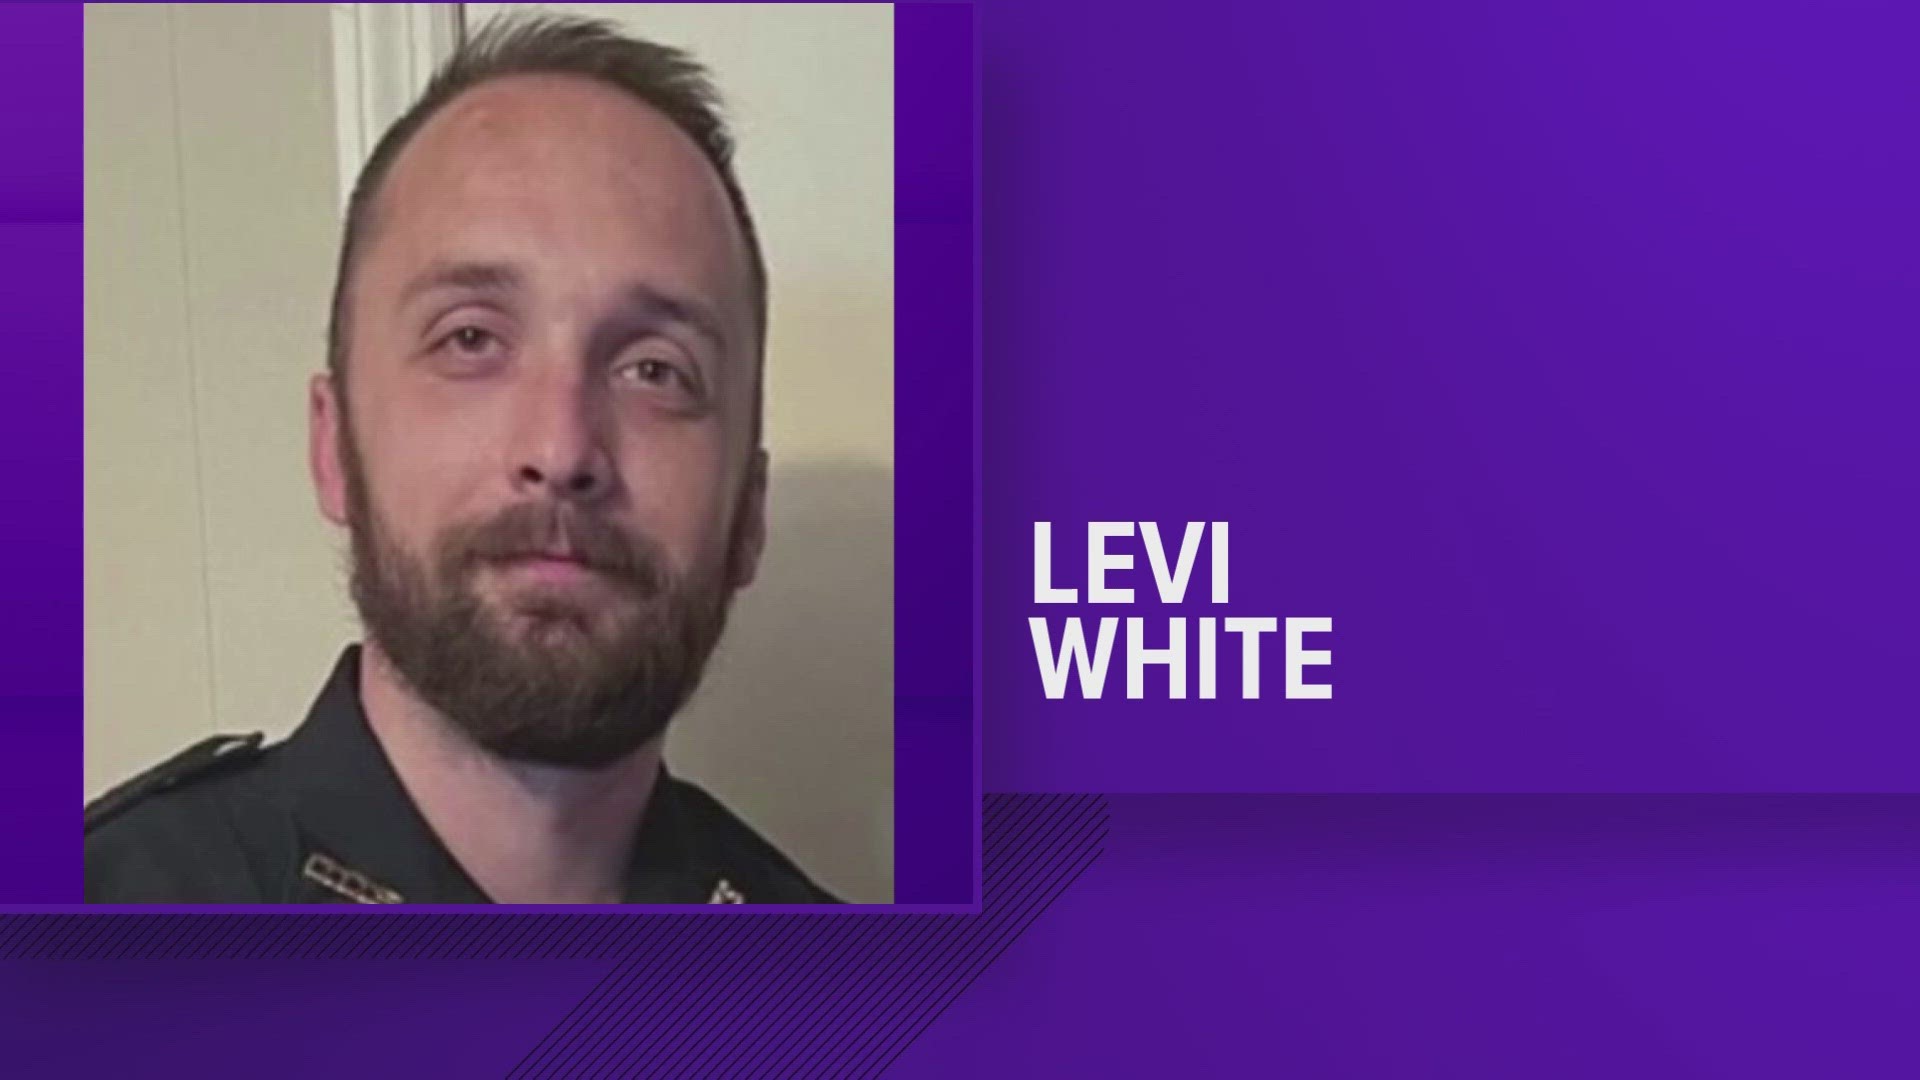 ANOTHER FORMER CRAWFORD COUNTY DEPUTY -- NOW EXPECTED TO PLEAD GUILTY OF DEPRIVING A SUSPECT OF THEIR CIVIL RIGHTS DURING AN ARREST IN MULBERRY...